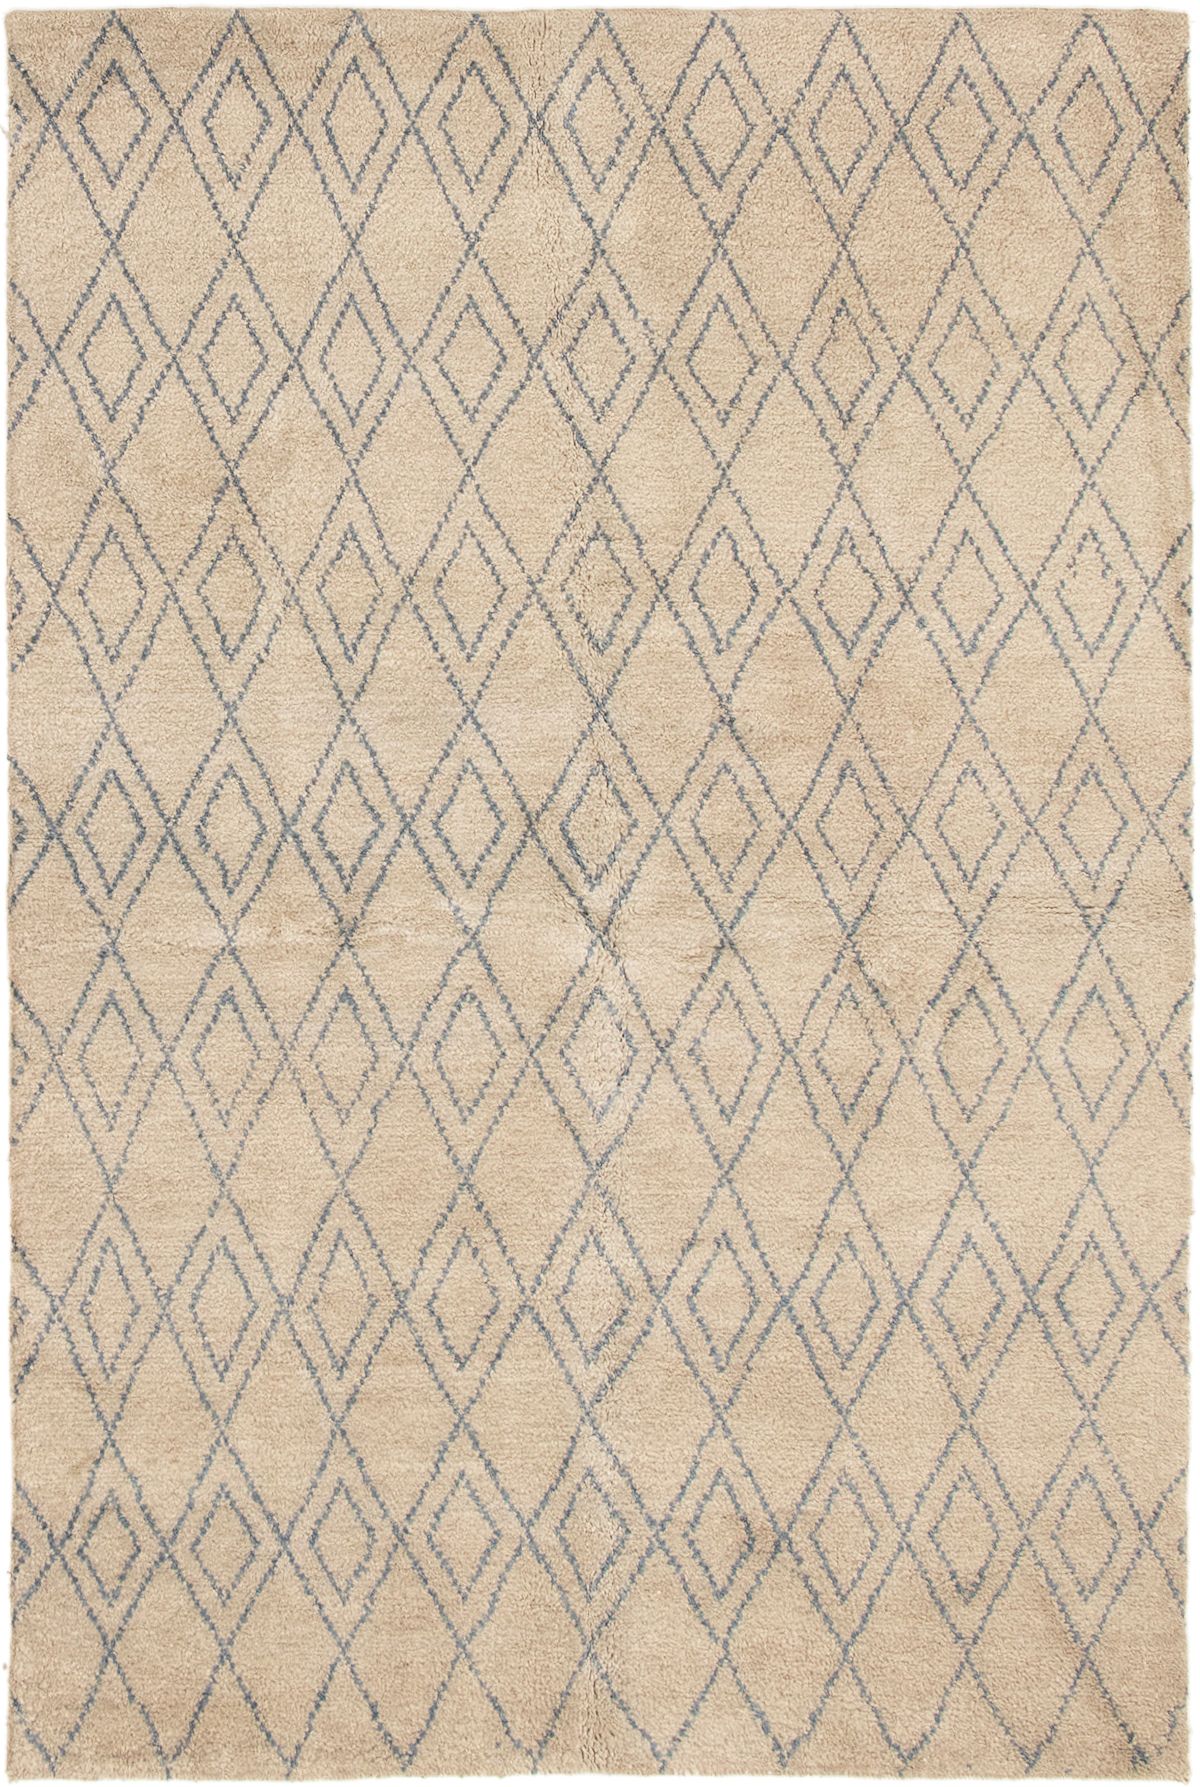 Hand-knotted Arlequin Khaki Wool Rug 5'2" x 7'9" Size: 5'2" x 7'9"  